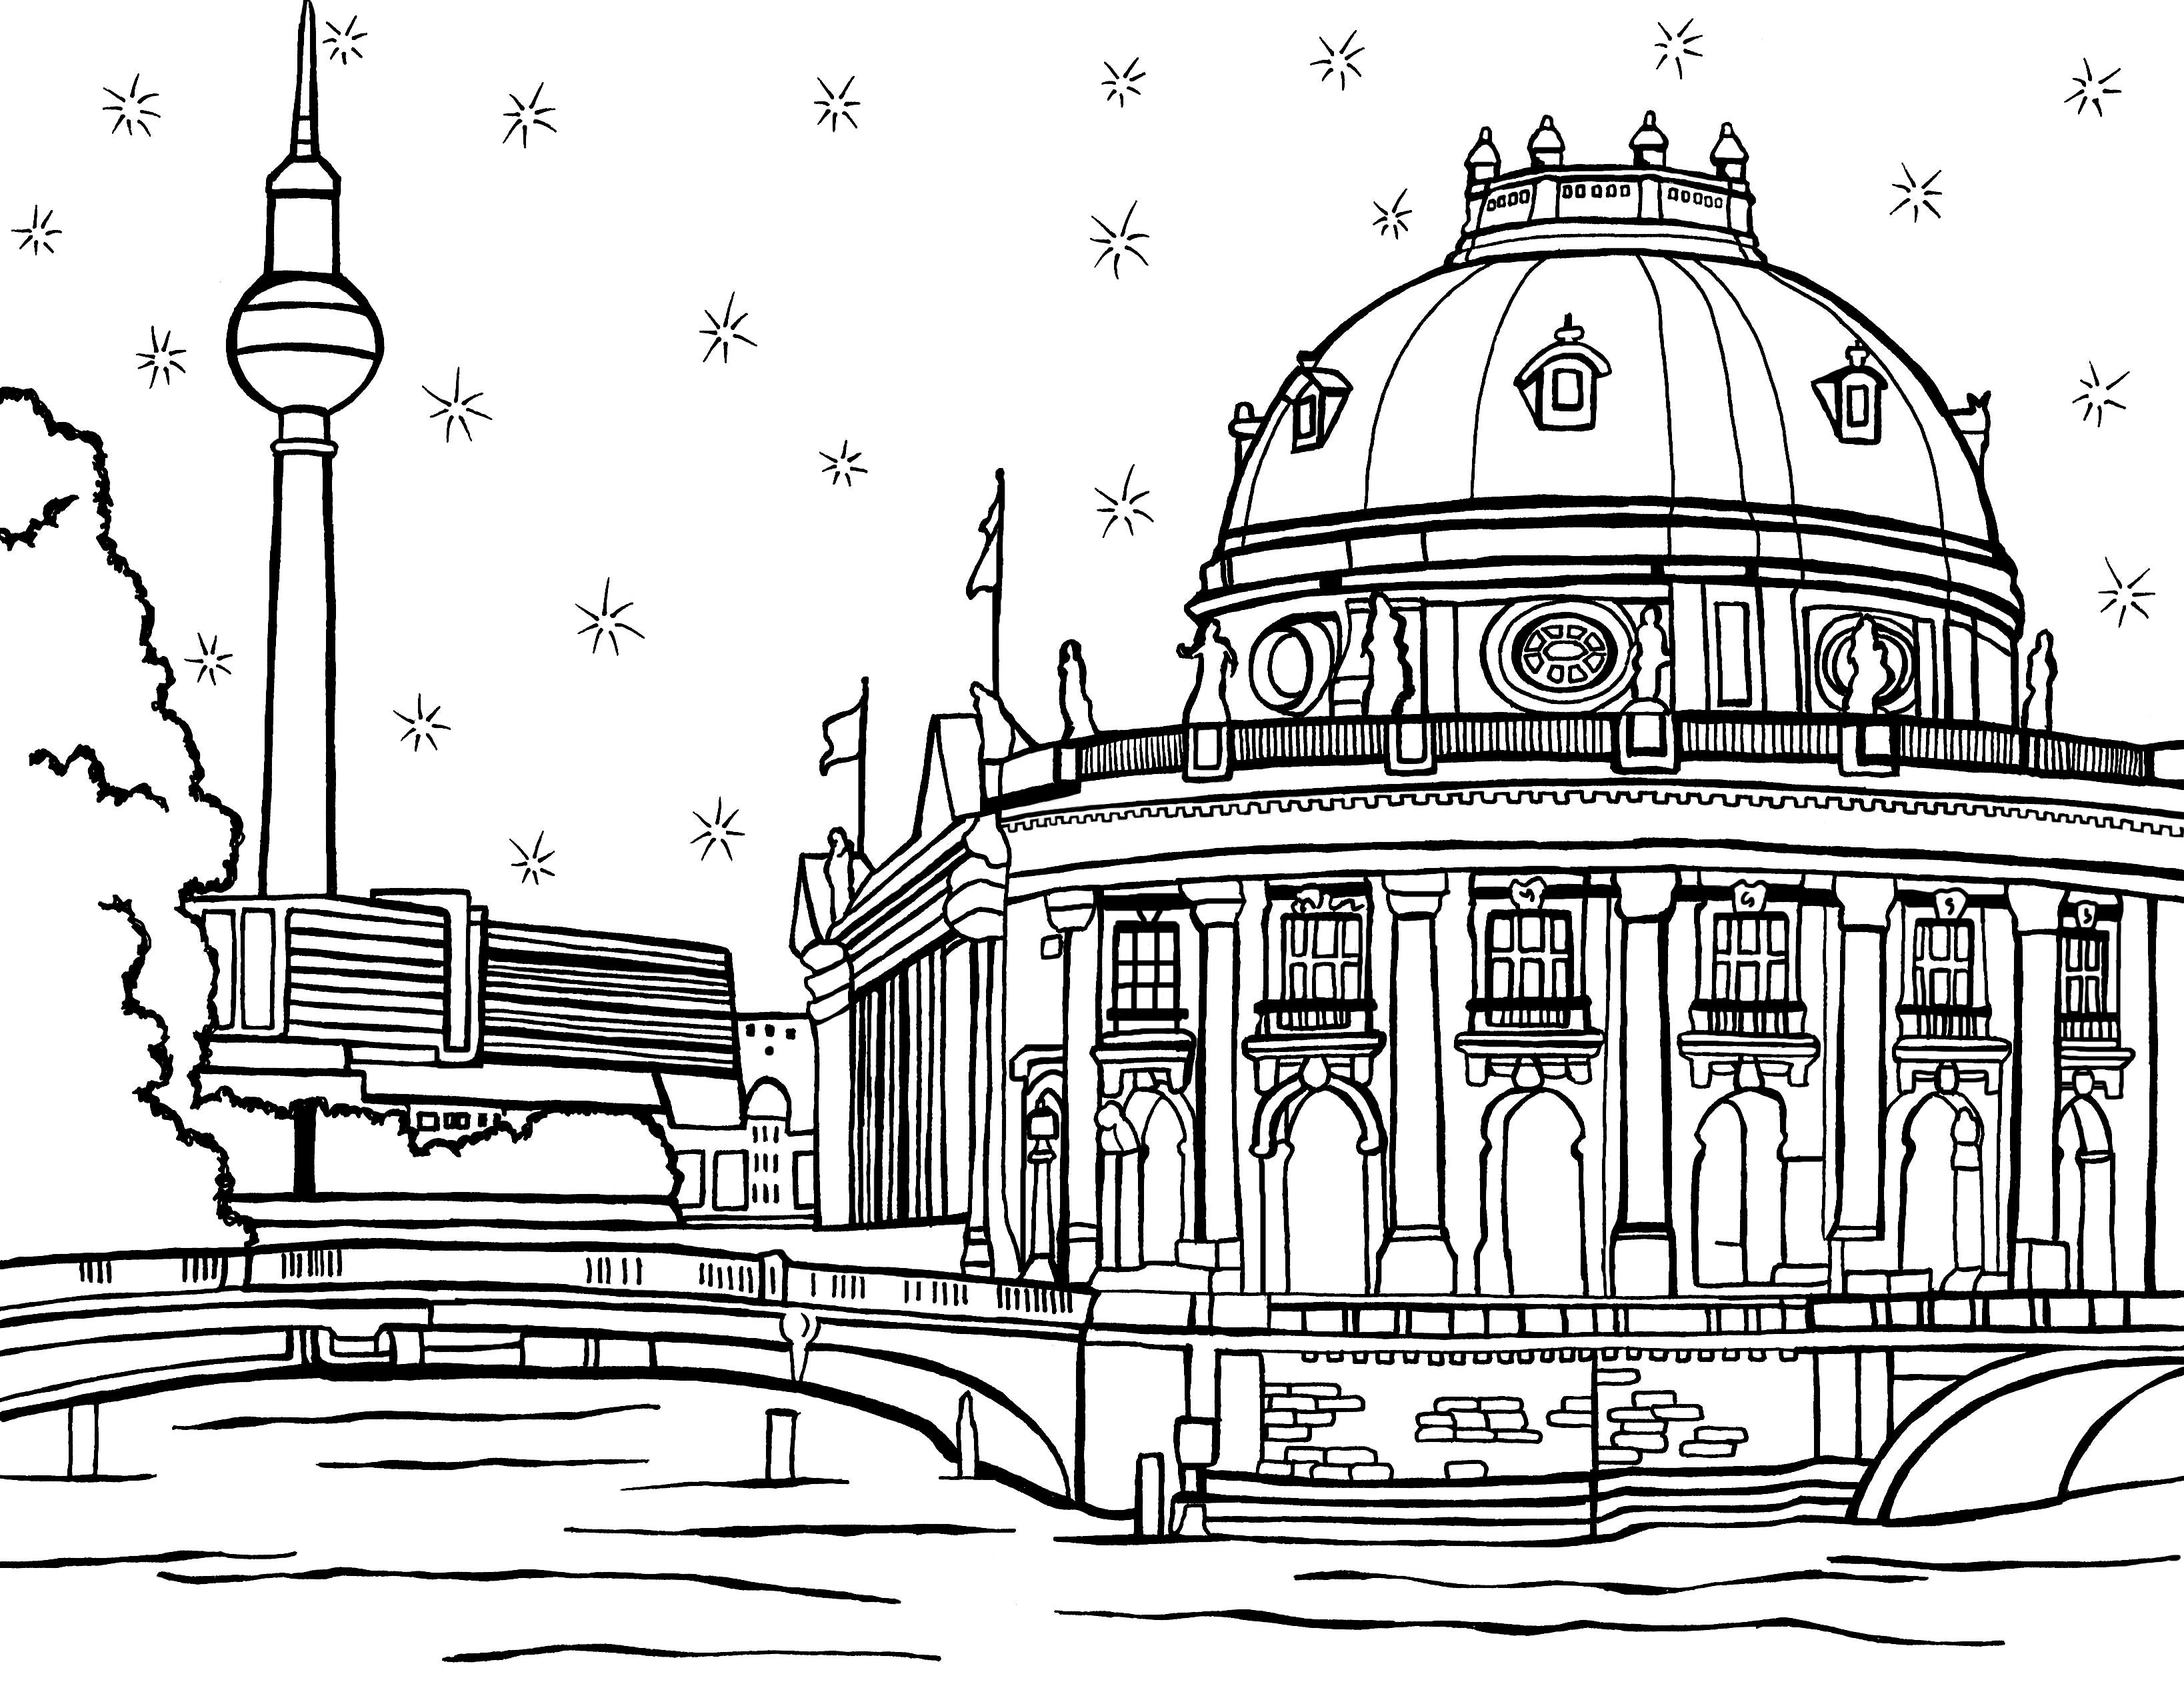 Black and white coloring page depicting the Bode Museum in Berlin, Germany, with its majestic dome and classic facade alongside the Spree river. The scene includes the iconic Berlin TV Tower (Fernsehturm) in the background, with a bridge spanning the river in the foreground. The sky is adorned with twinkling stars, suggesting a peaceful night in the city. Free coloring page :: You-Color